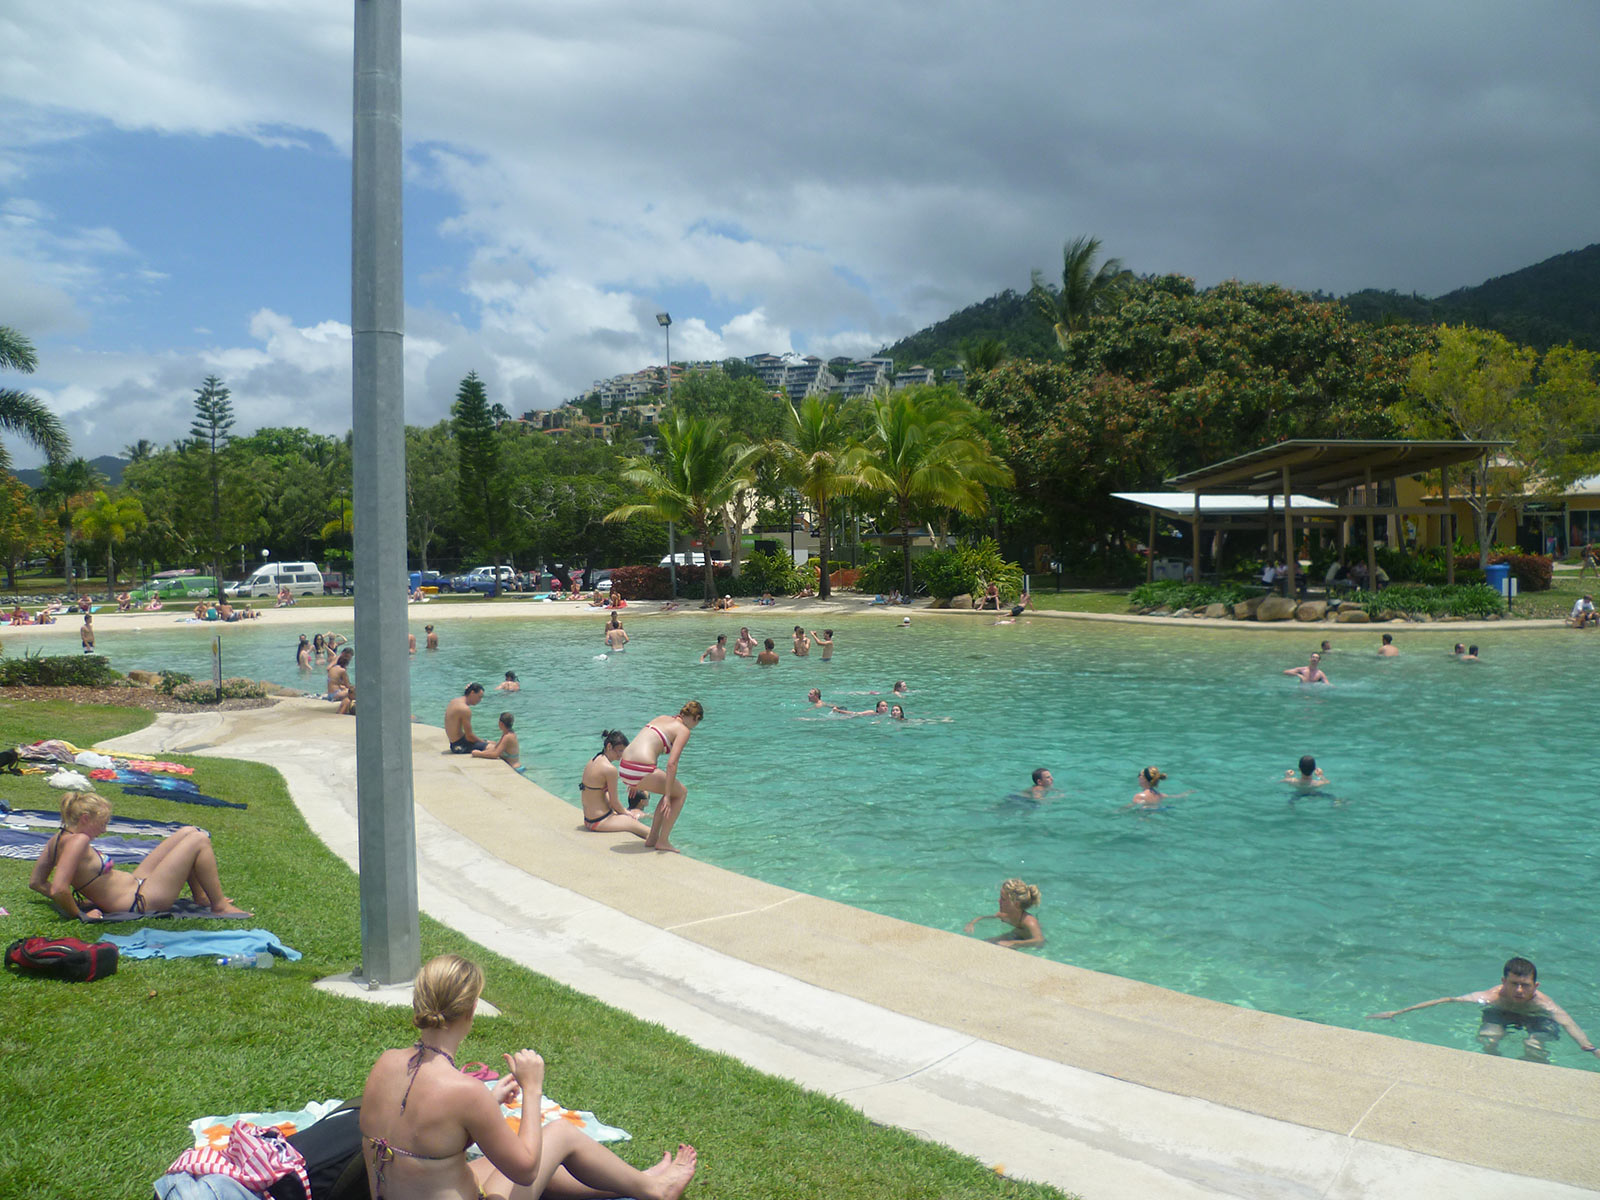 Airlie beach with cloud cover on Magnetic Island in East Coast Australia. Settling into the east coast nicely